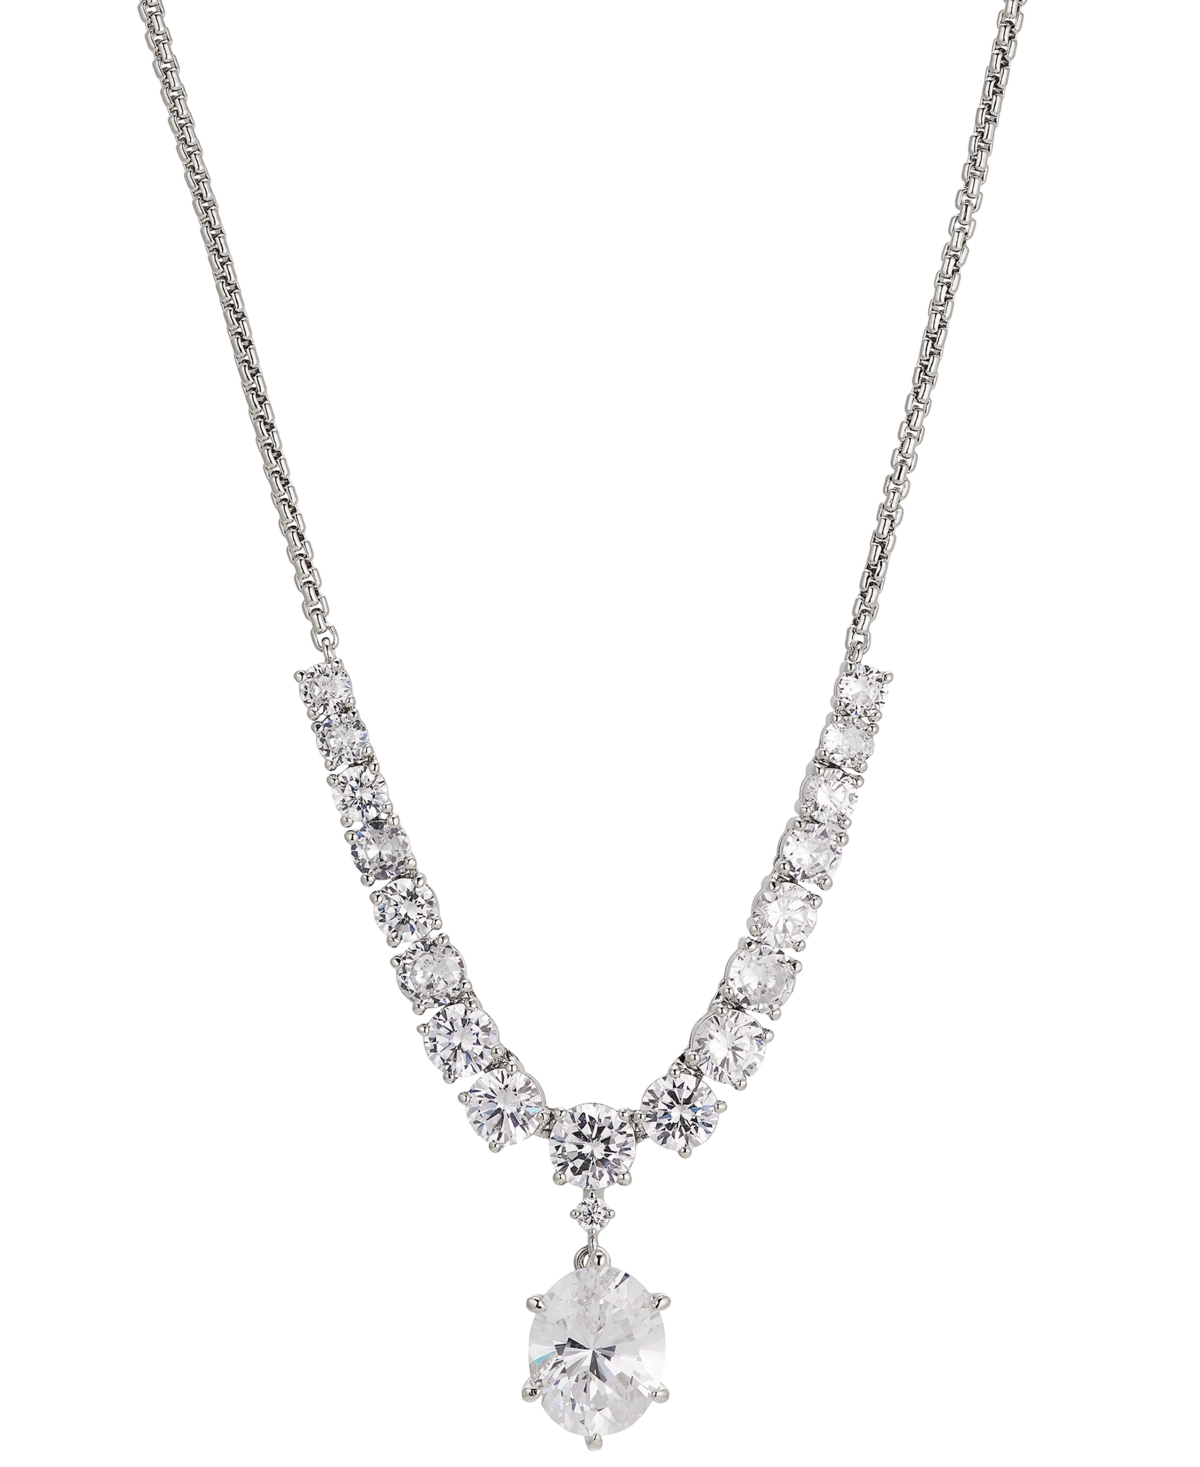 Silver-Tone Cubic Zirconia Statement Necklace, 15" + 3" Extender, Created for Macy's - Silver